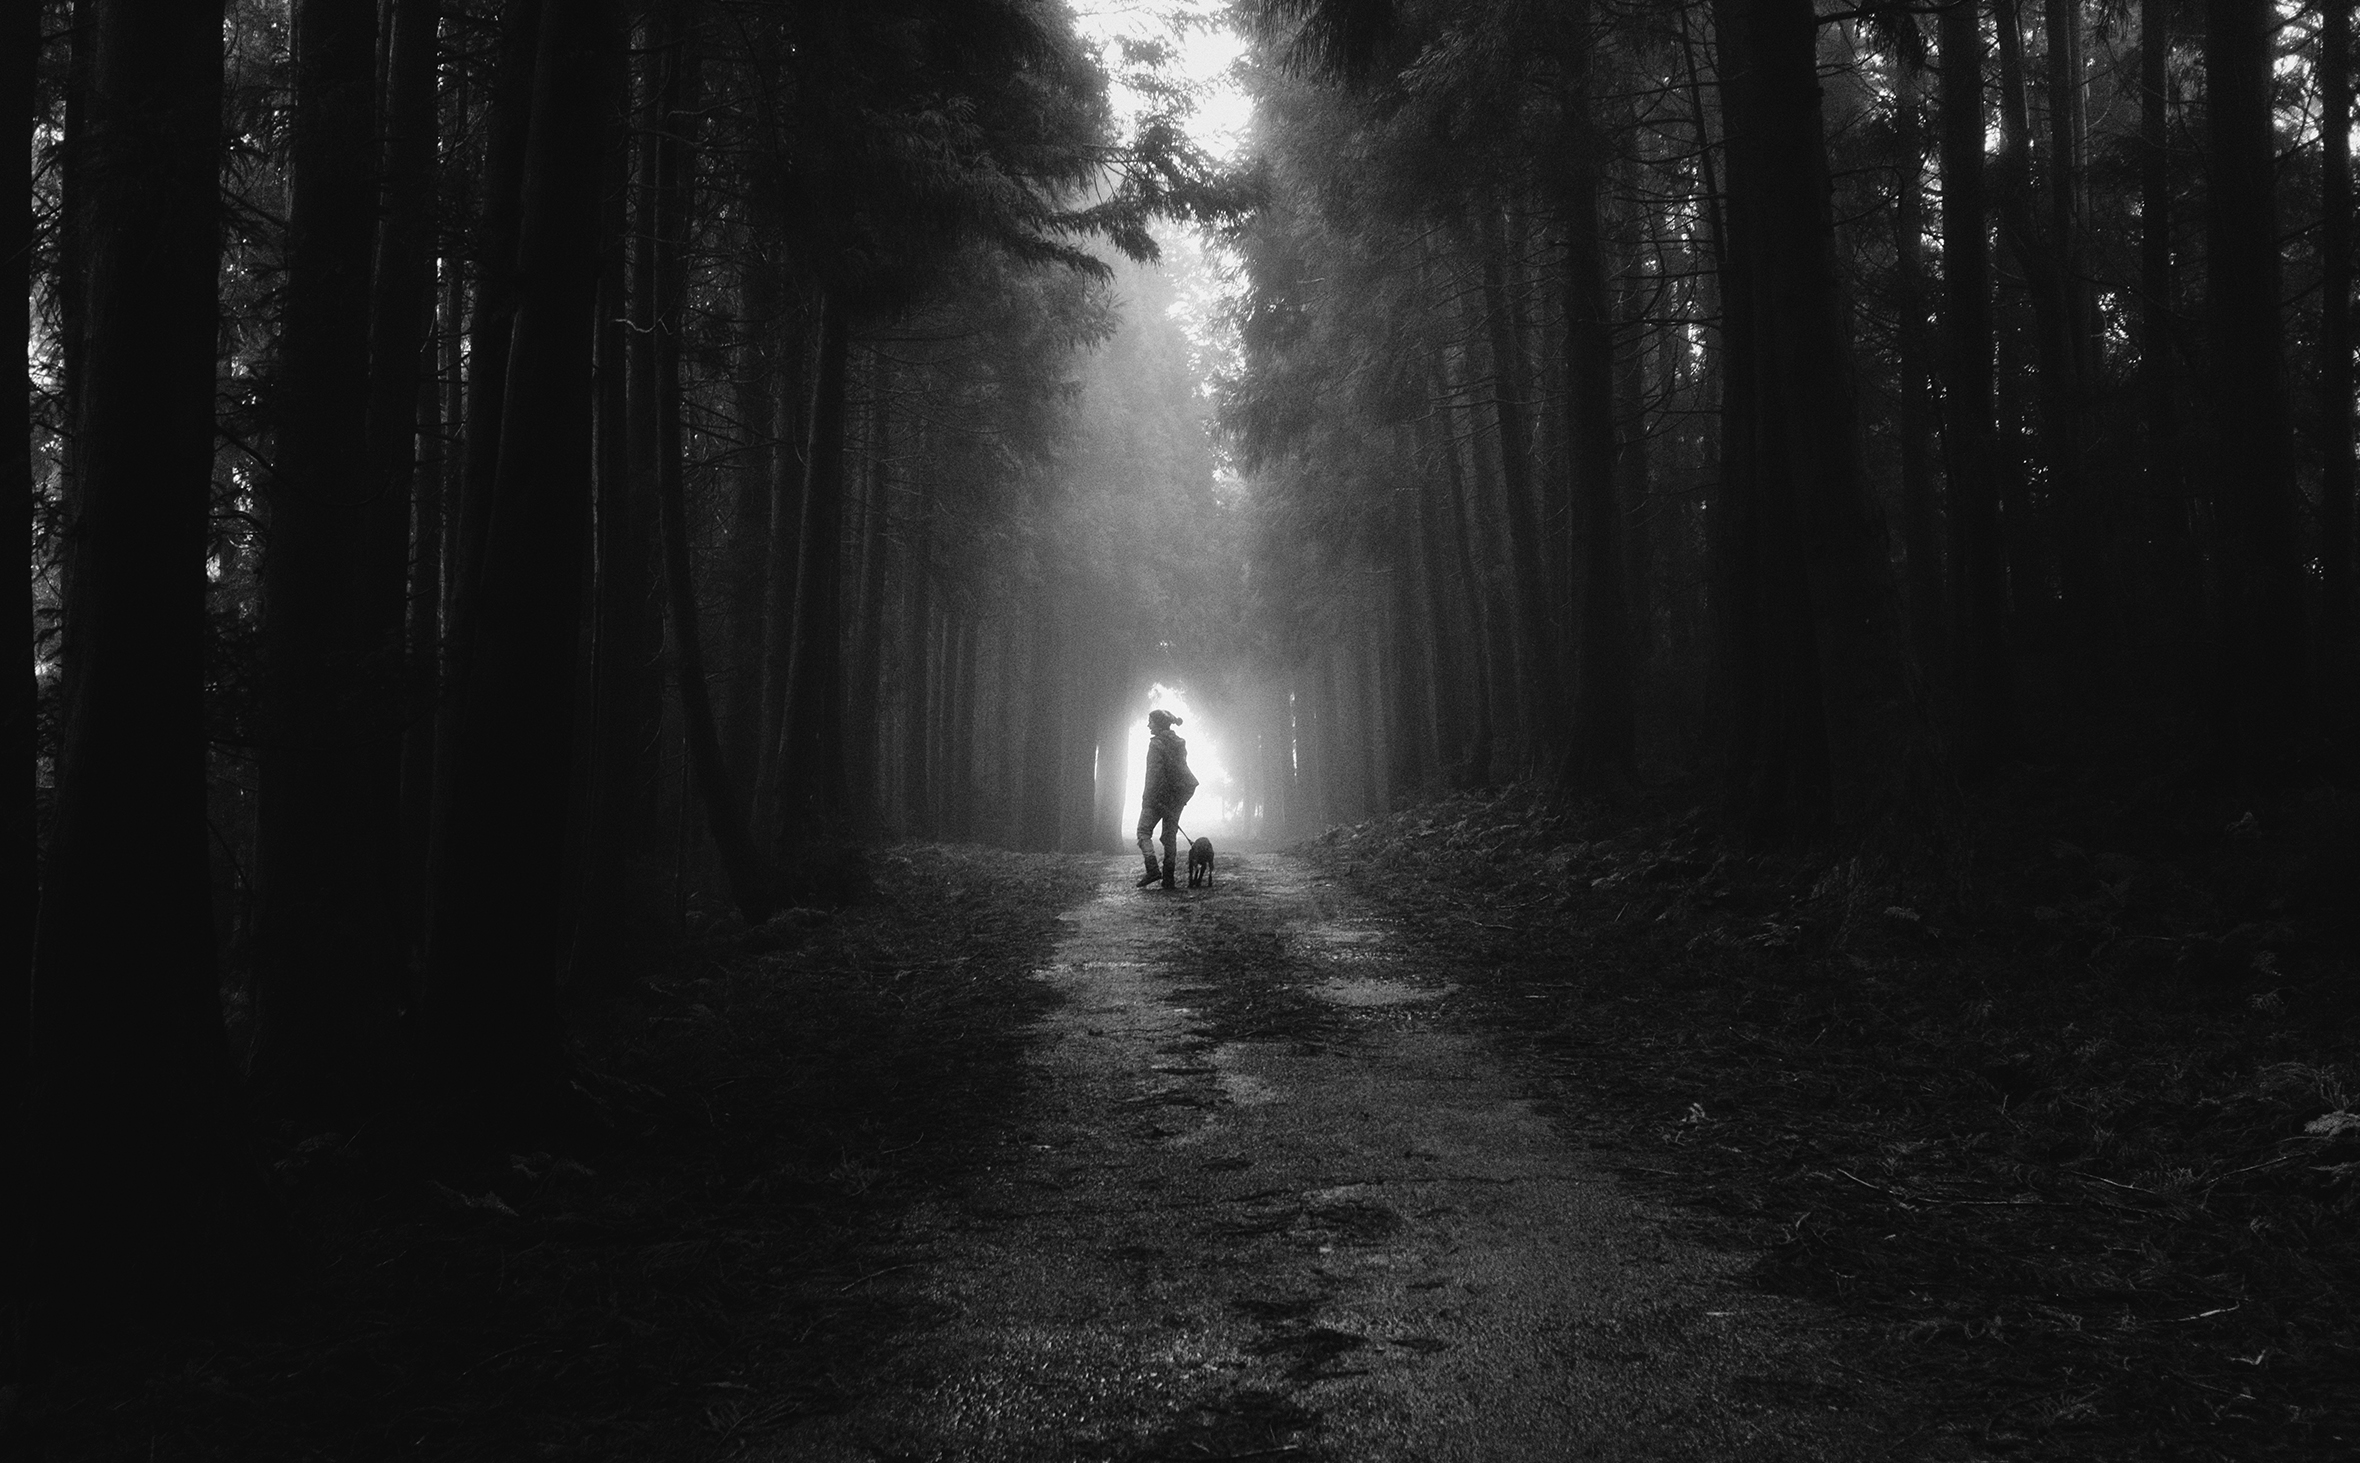 A person dressed for cold weather is in the distance walking a dog down a dirt road through a forest. The image is dark with some light above the road, but most of the light is in an oval around the person. It looks like a tunnel in the forest.